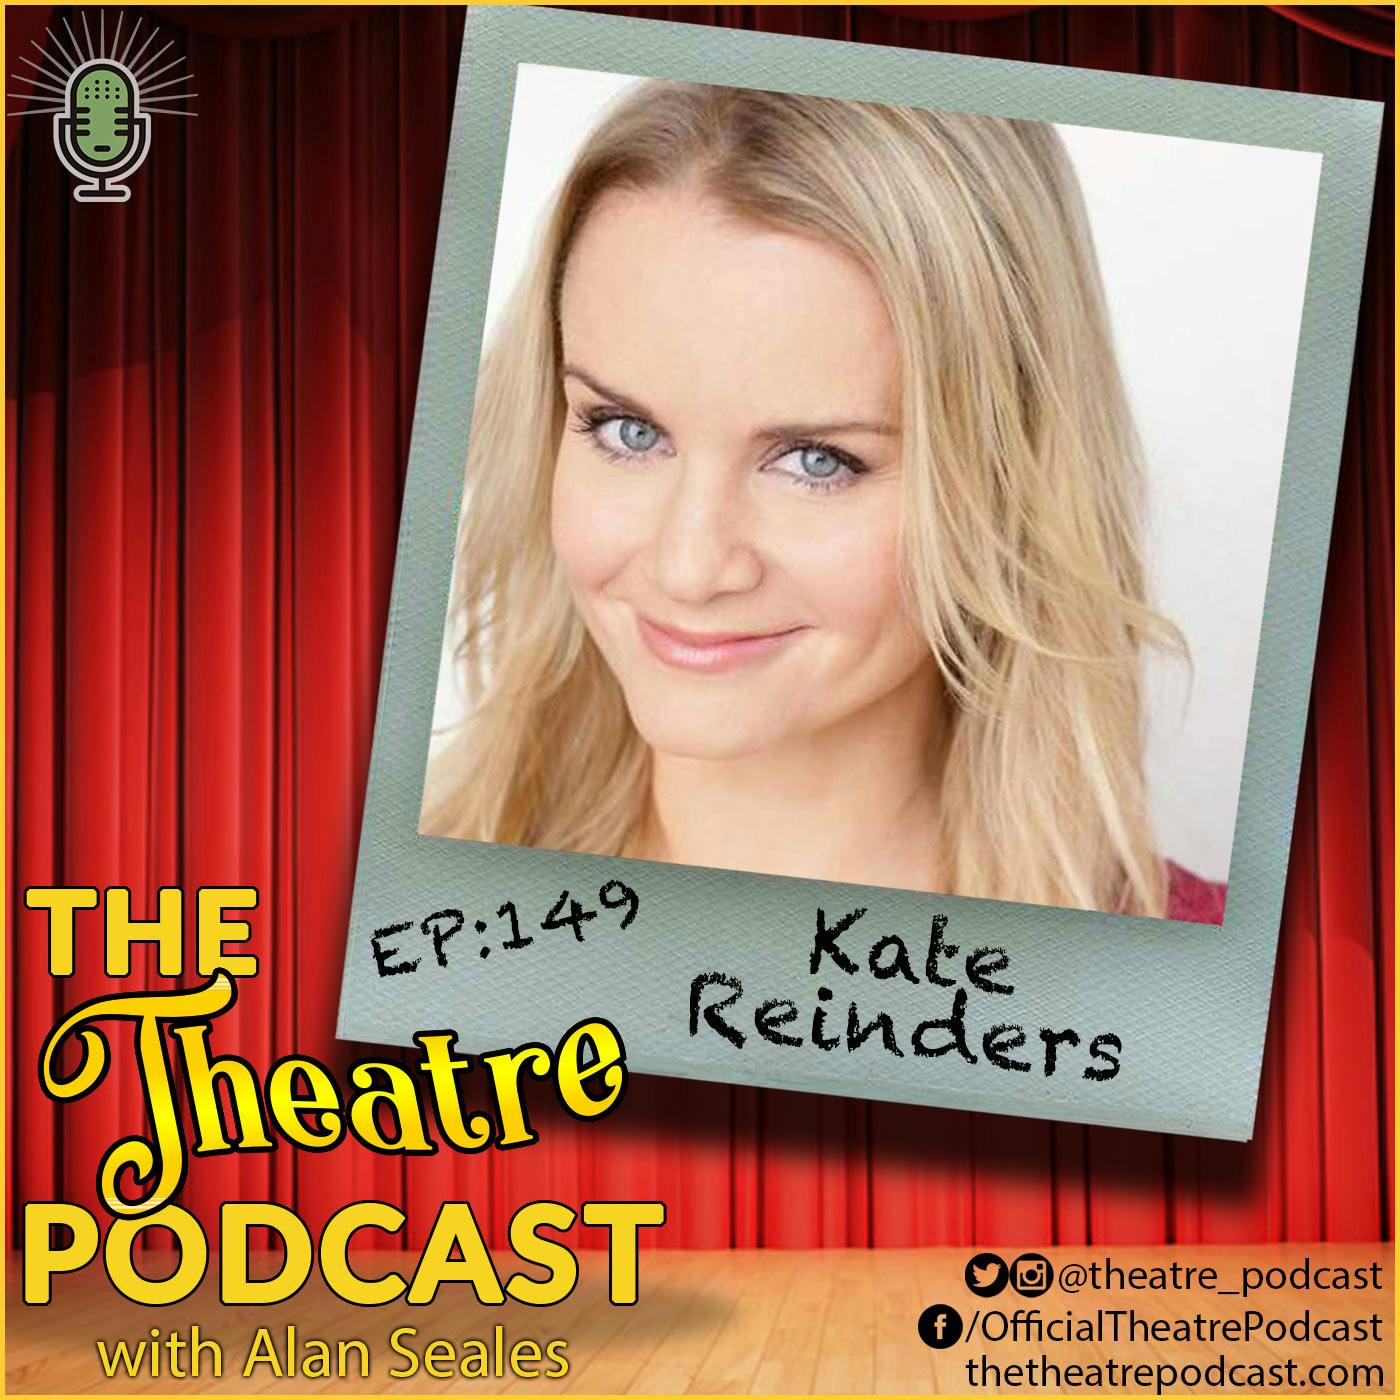 Ep149 - Kate – Podcast Podcast School Theatre with Musical: The – Reinders: The Alan Series\